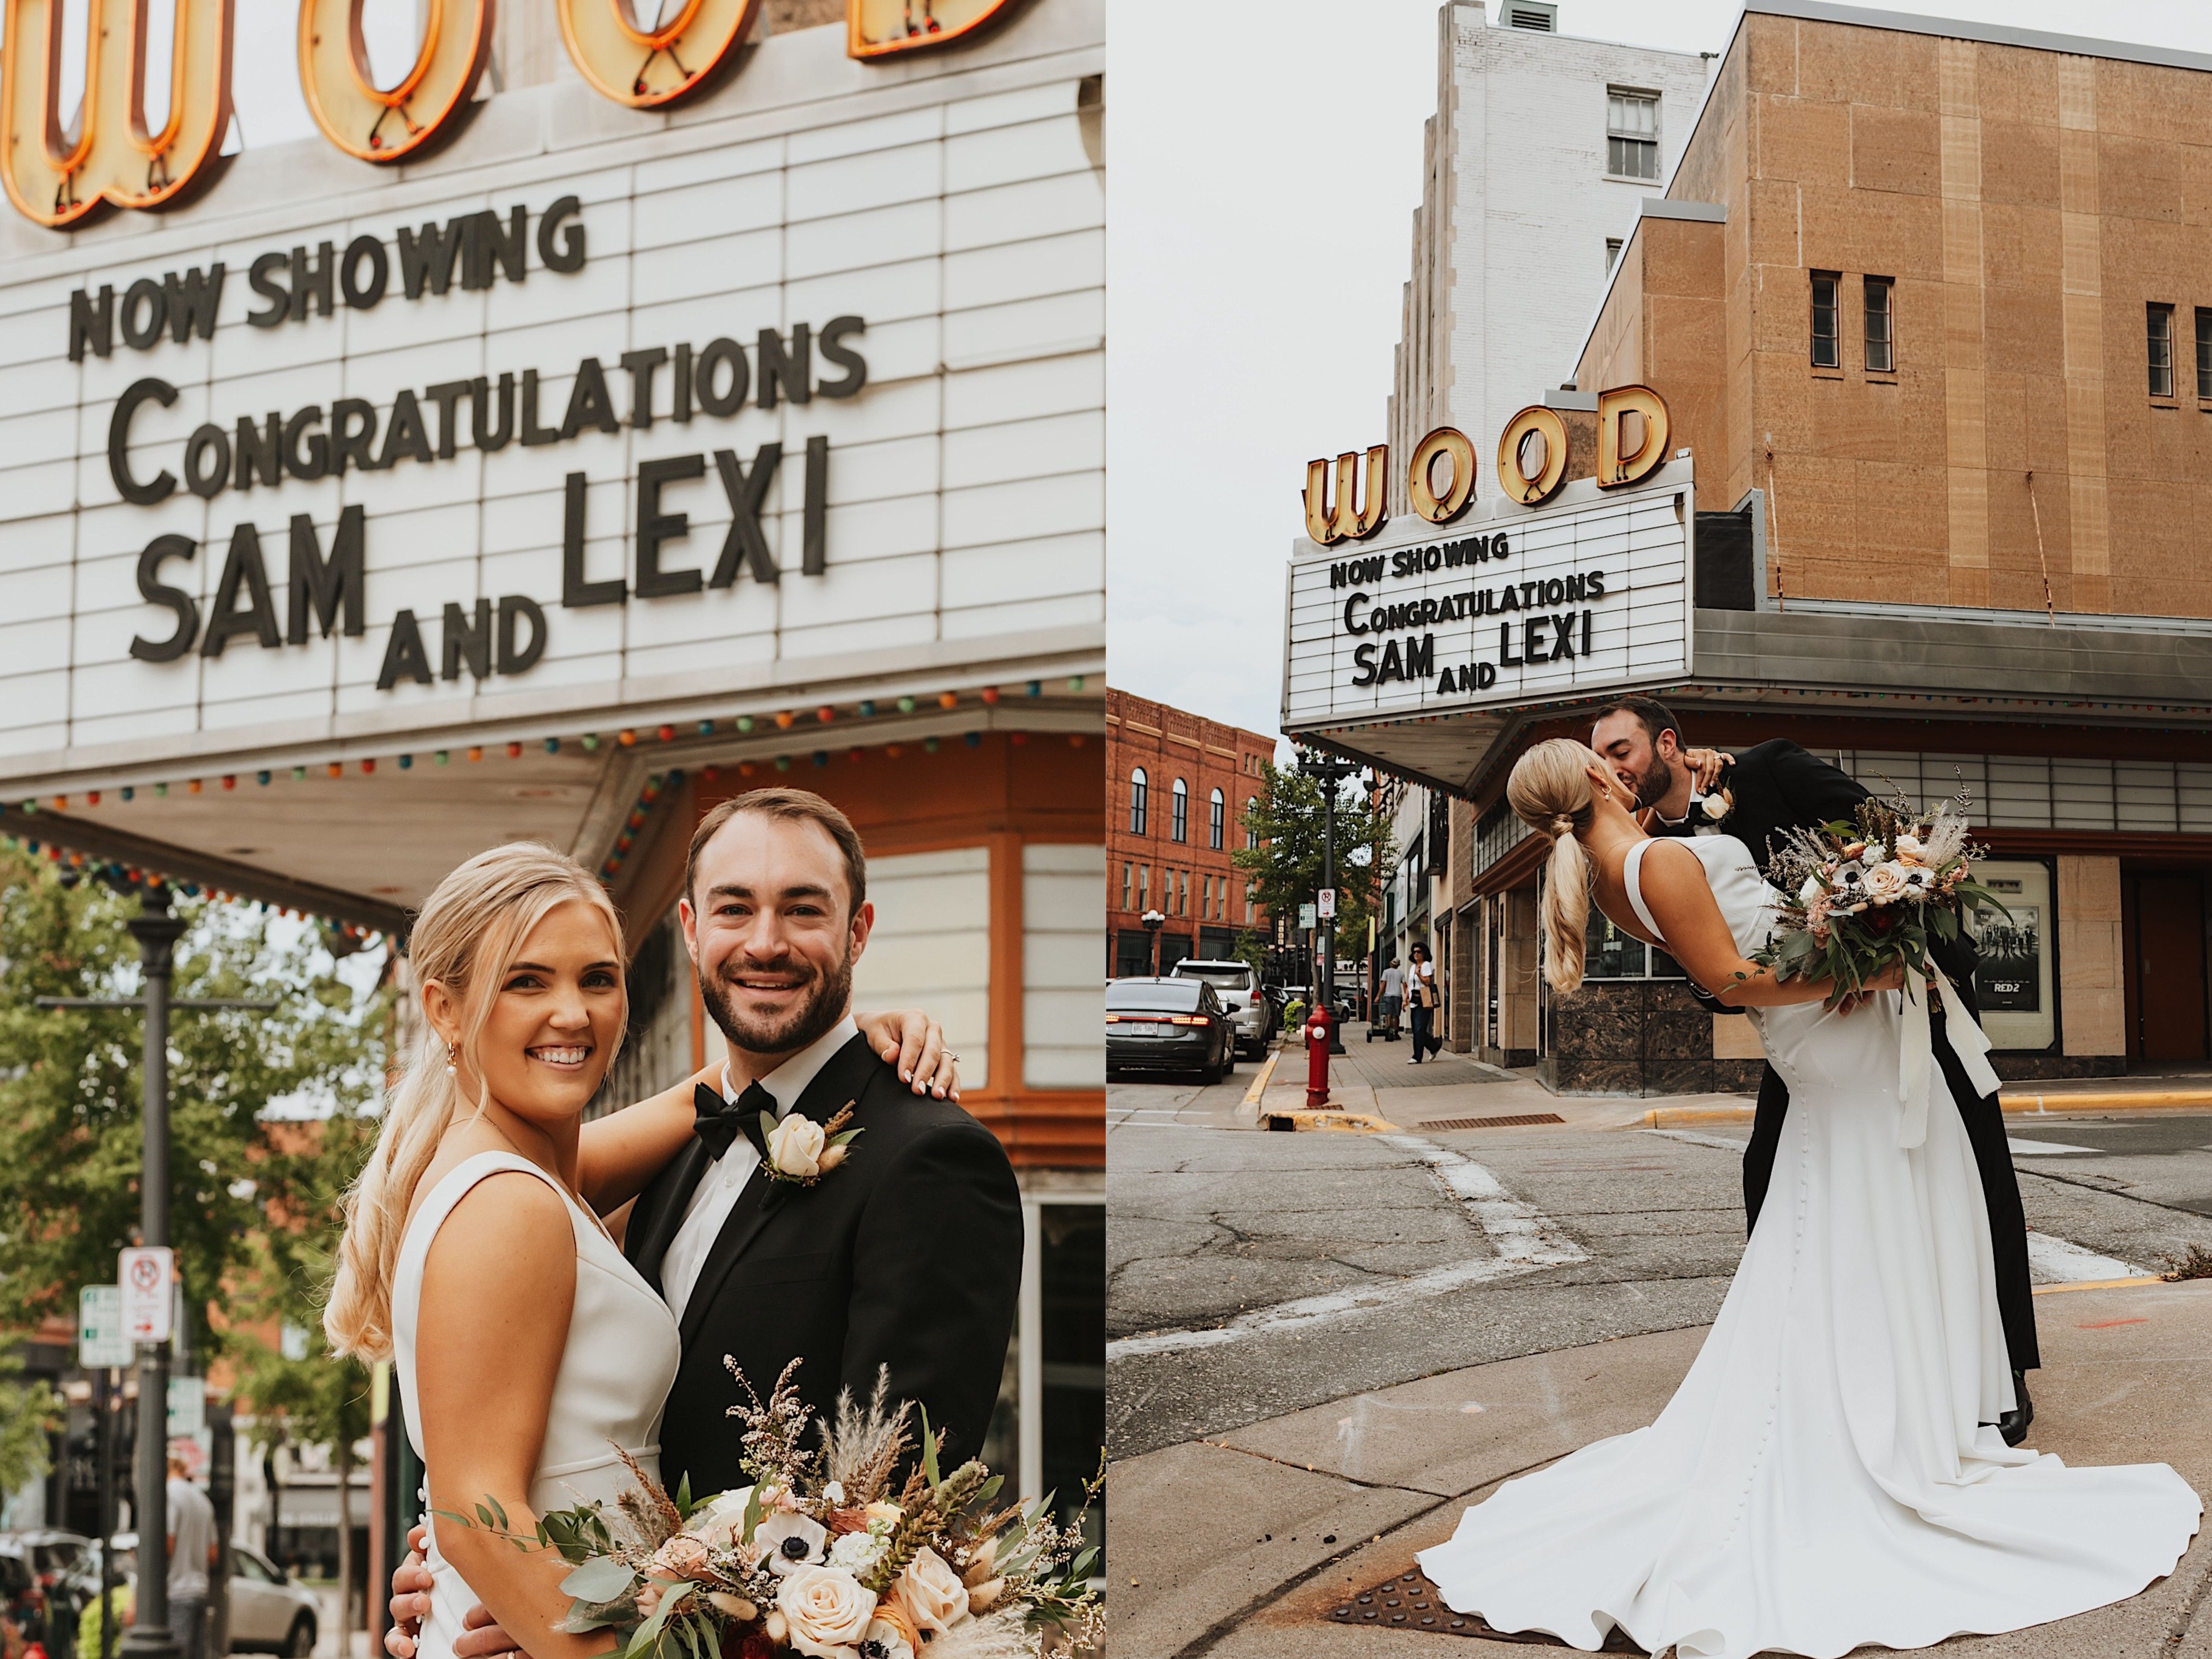 2 photos side by side of a bride and groom in front of a movie theater sign saying "Now Showing Congratulations Sam and Lexi", the left photo they are smiling at the camera and the right has them kissing